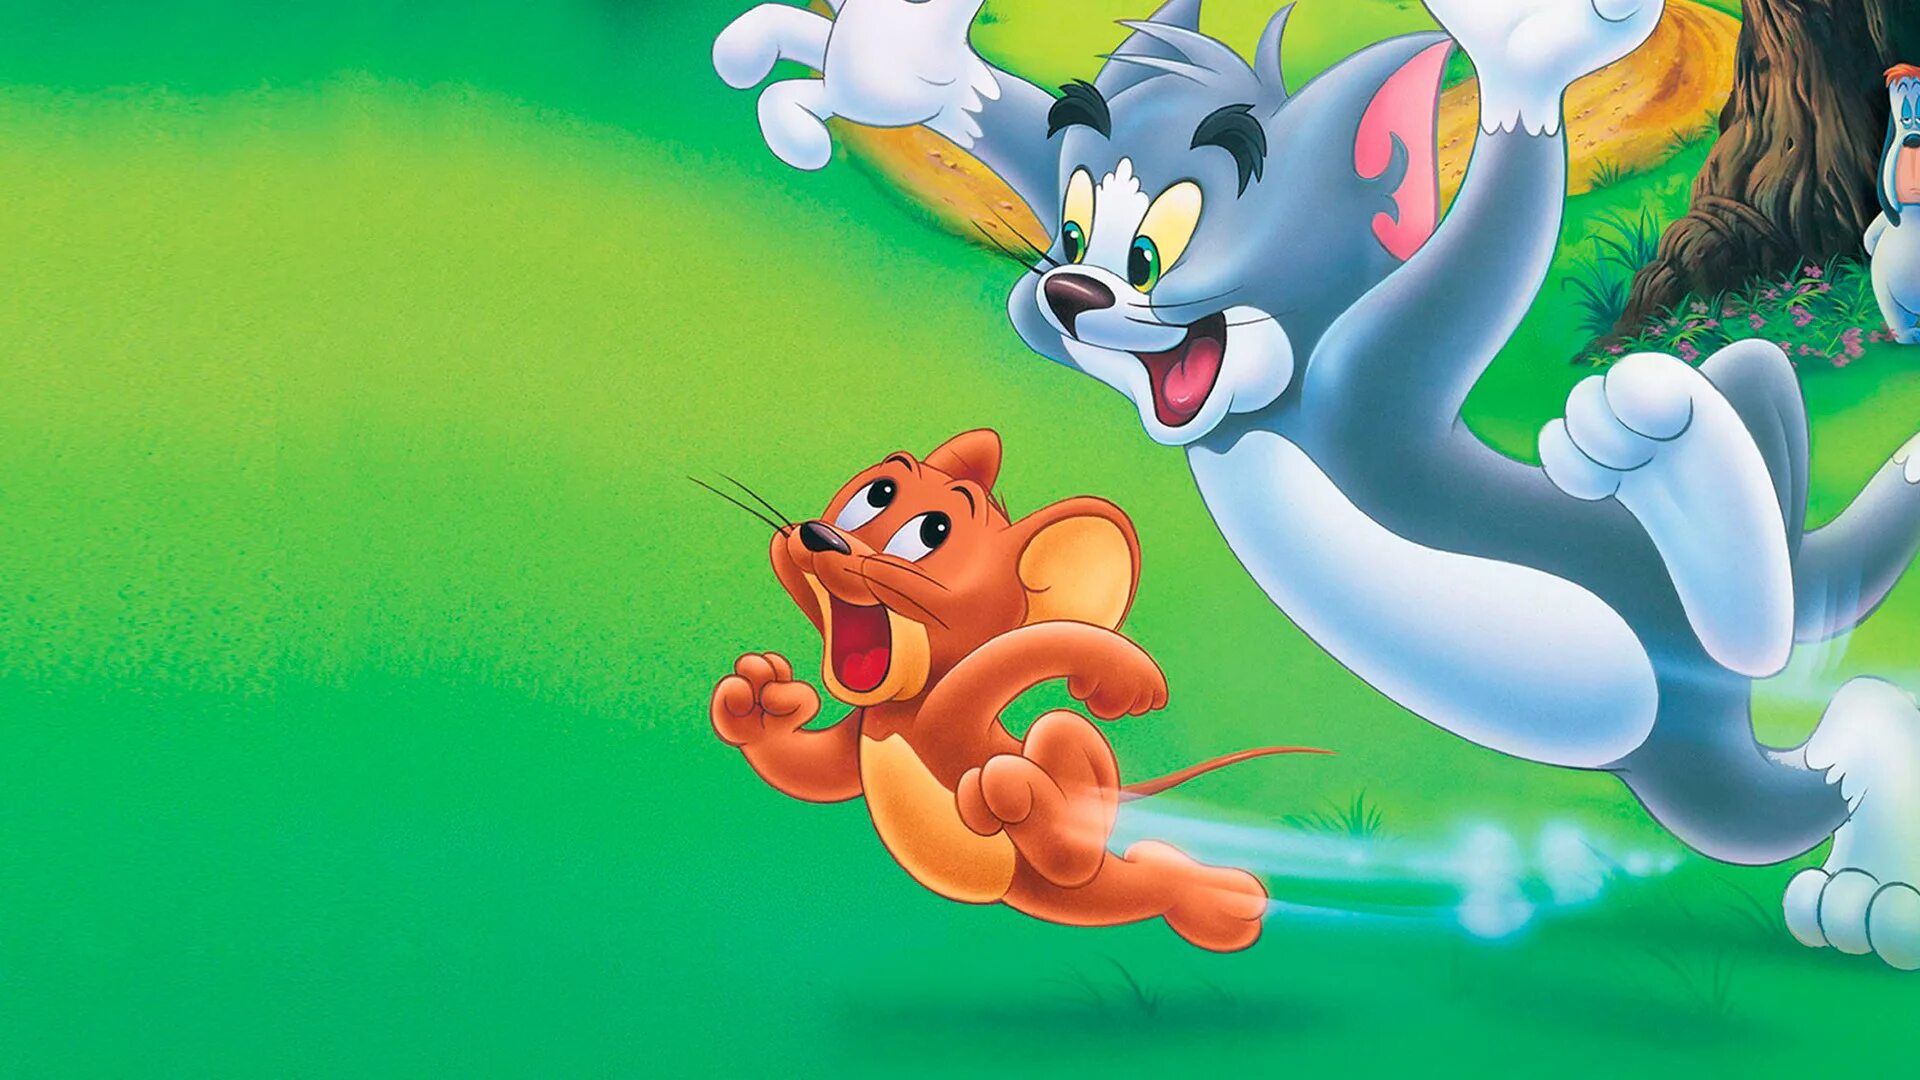 Tom and Jerry. Tom and Jerry 2021. Том и Джерри 2023. Tom 7 Jerry. Новый том и джерри 2023